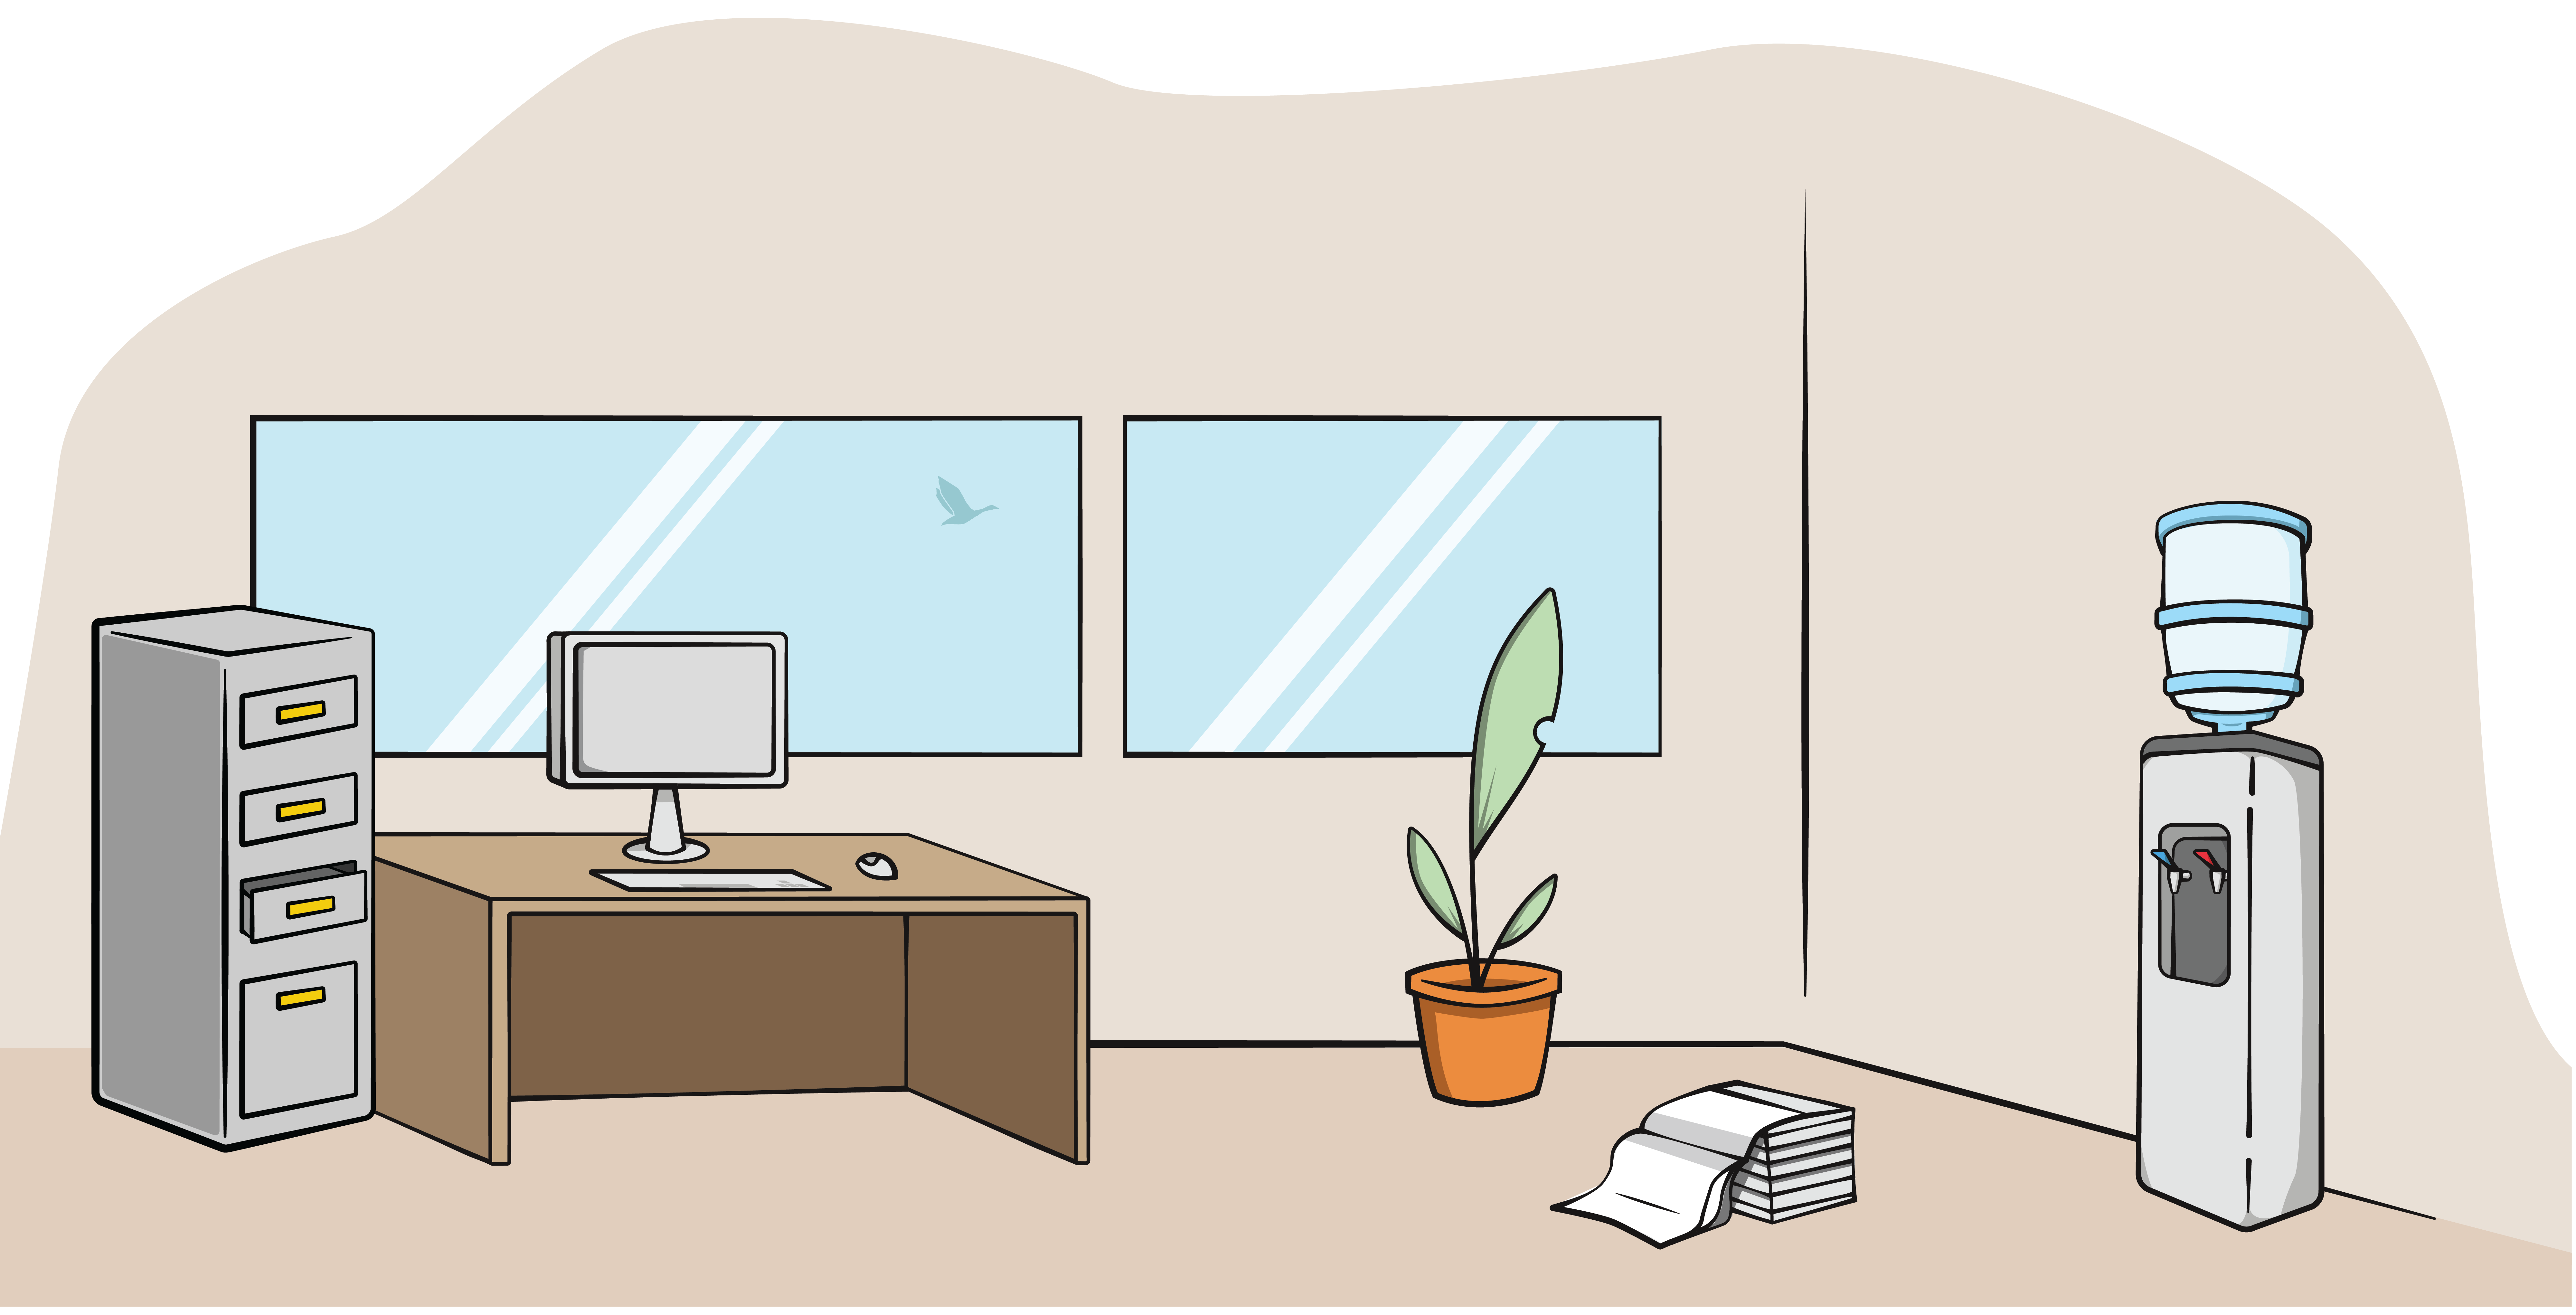 Illustrated office scene with filing cabinet, desk, floor plant and water cooler